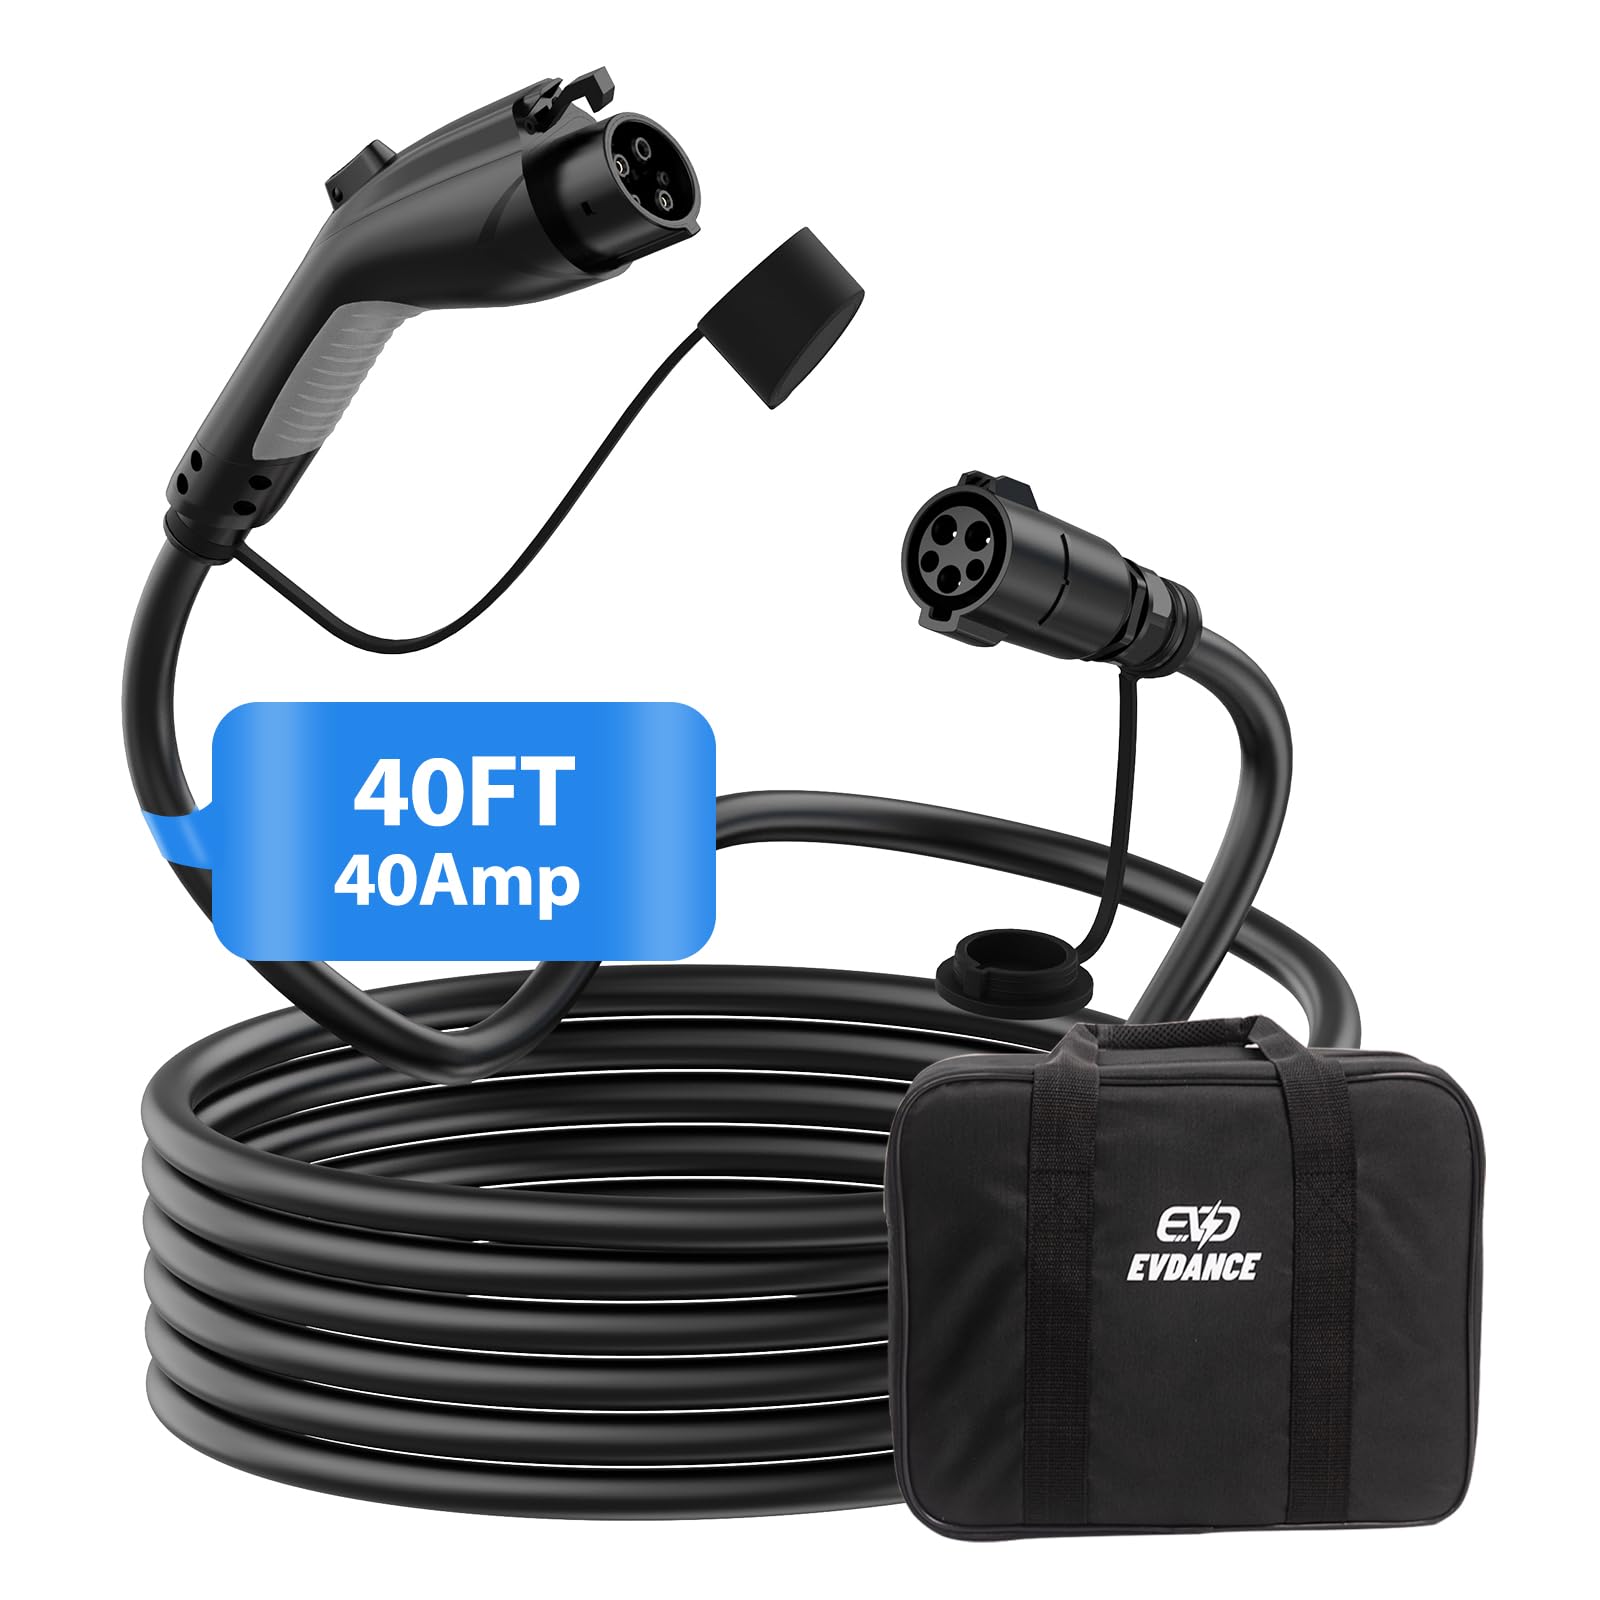 40FT-40Amp chonnect charger to ev car